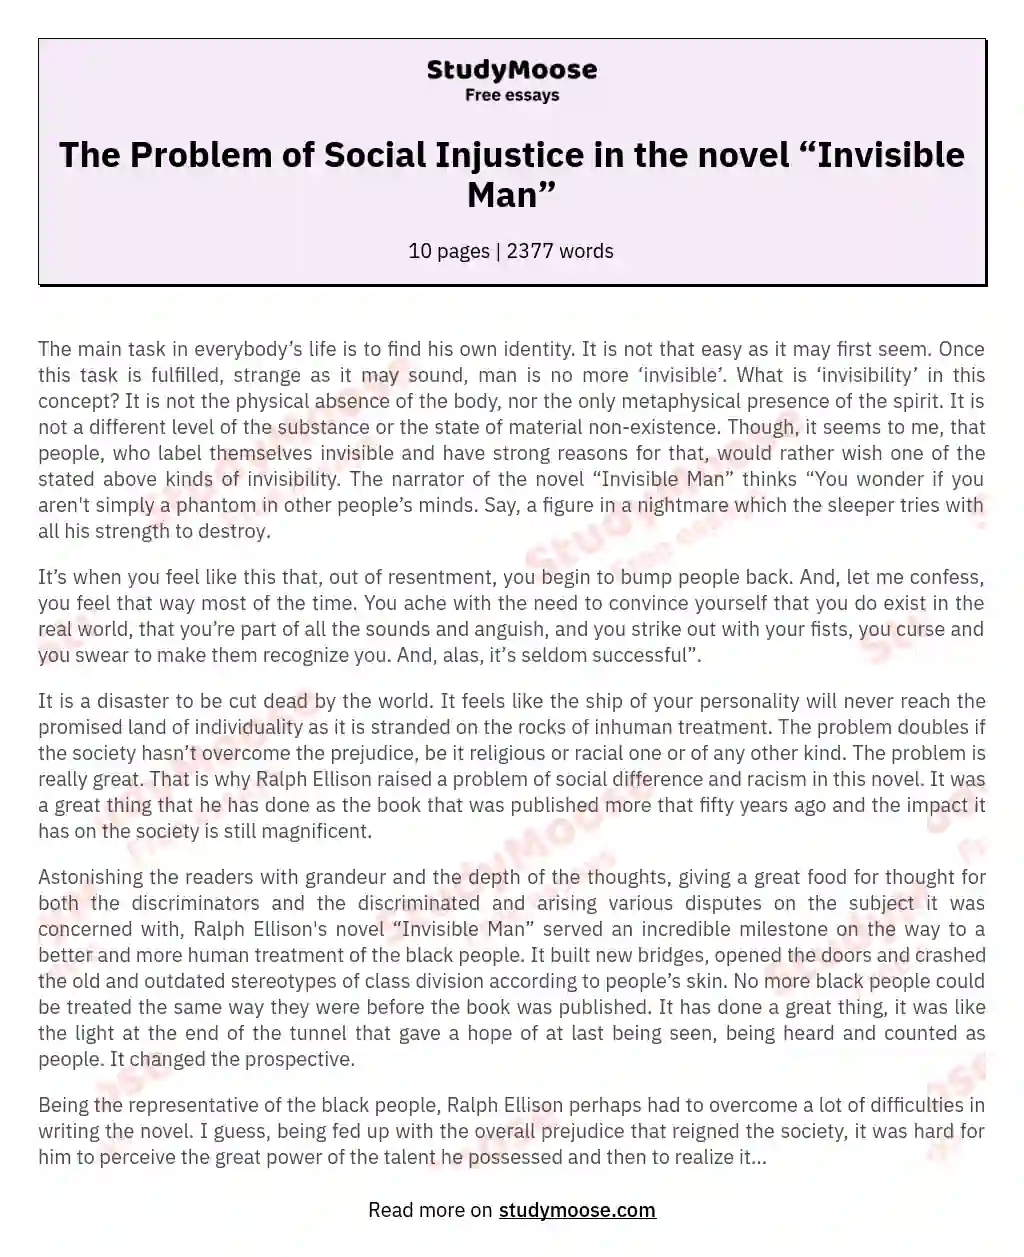 The Problem of Social Injustice in the novel “Invisible Man” essay